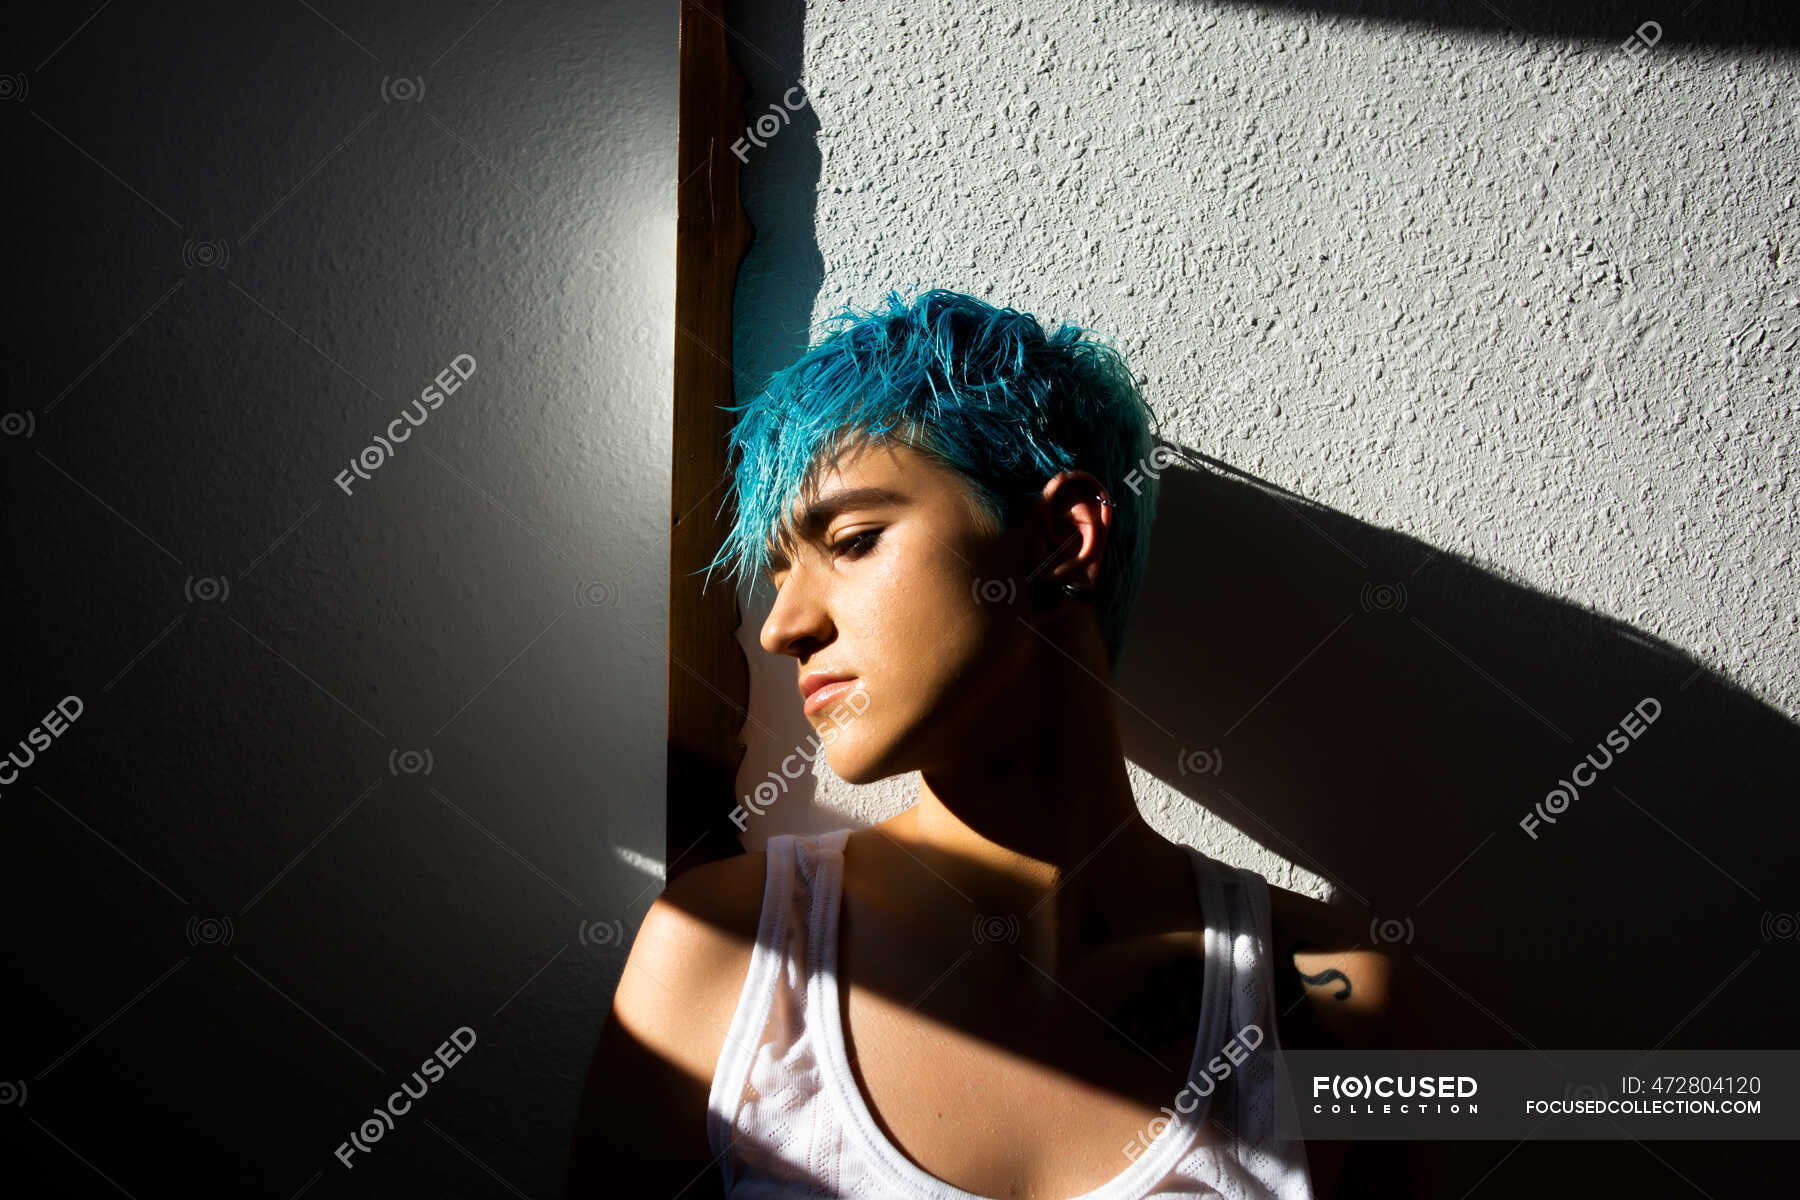 Blue Hair: A History of Rebellion and Nonconformity - wide 5